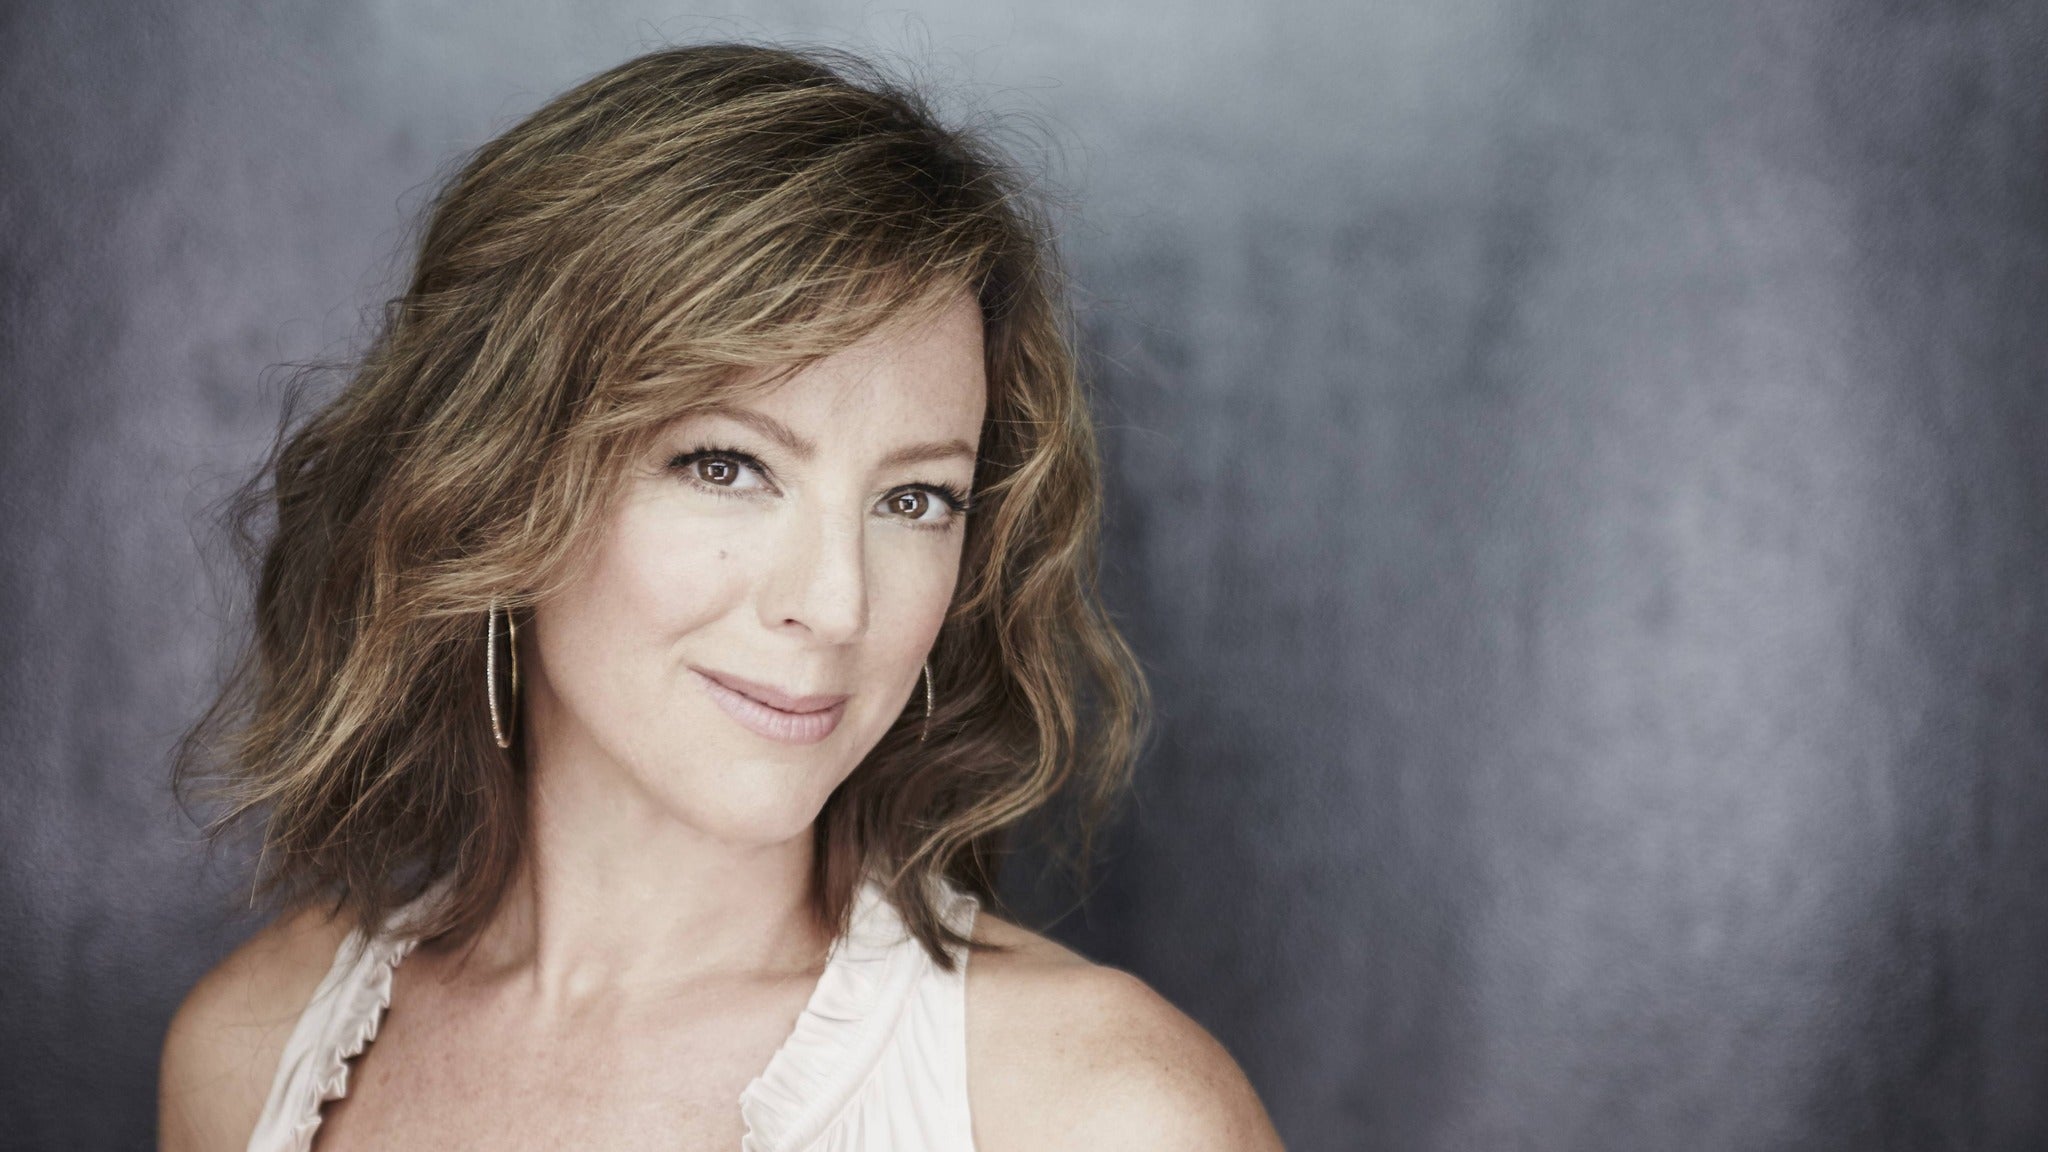 presale code for An Intimate Acoustic Evening with Sarah McLachlan tickets in Windsor - ON (The Colosseum at Caesars Windsor)